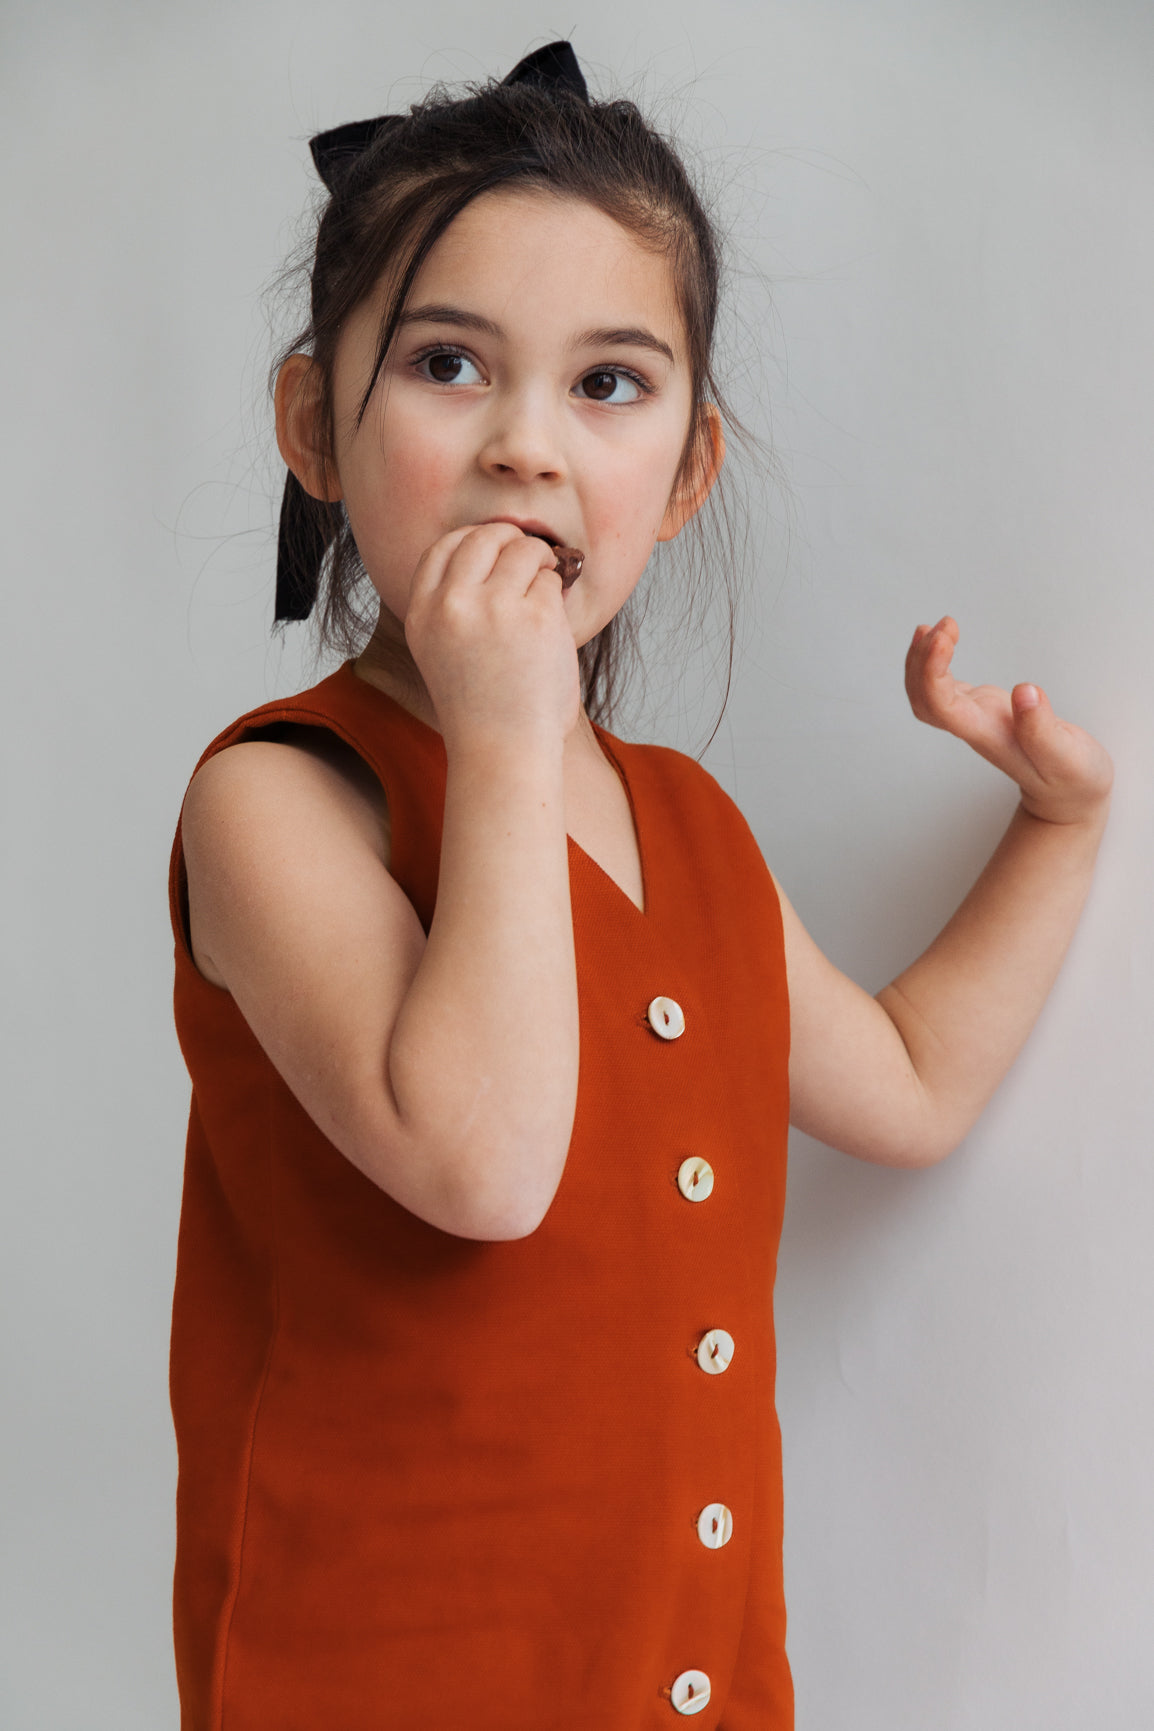 Burnt Orange rust sienna terracotta ginger color Kids Mini Jumpsuit overall workwear cotton canvas with pockets 5 buttons v-neck OEKO-TEX sustainable clothes handmade